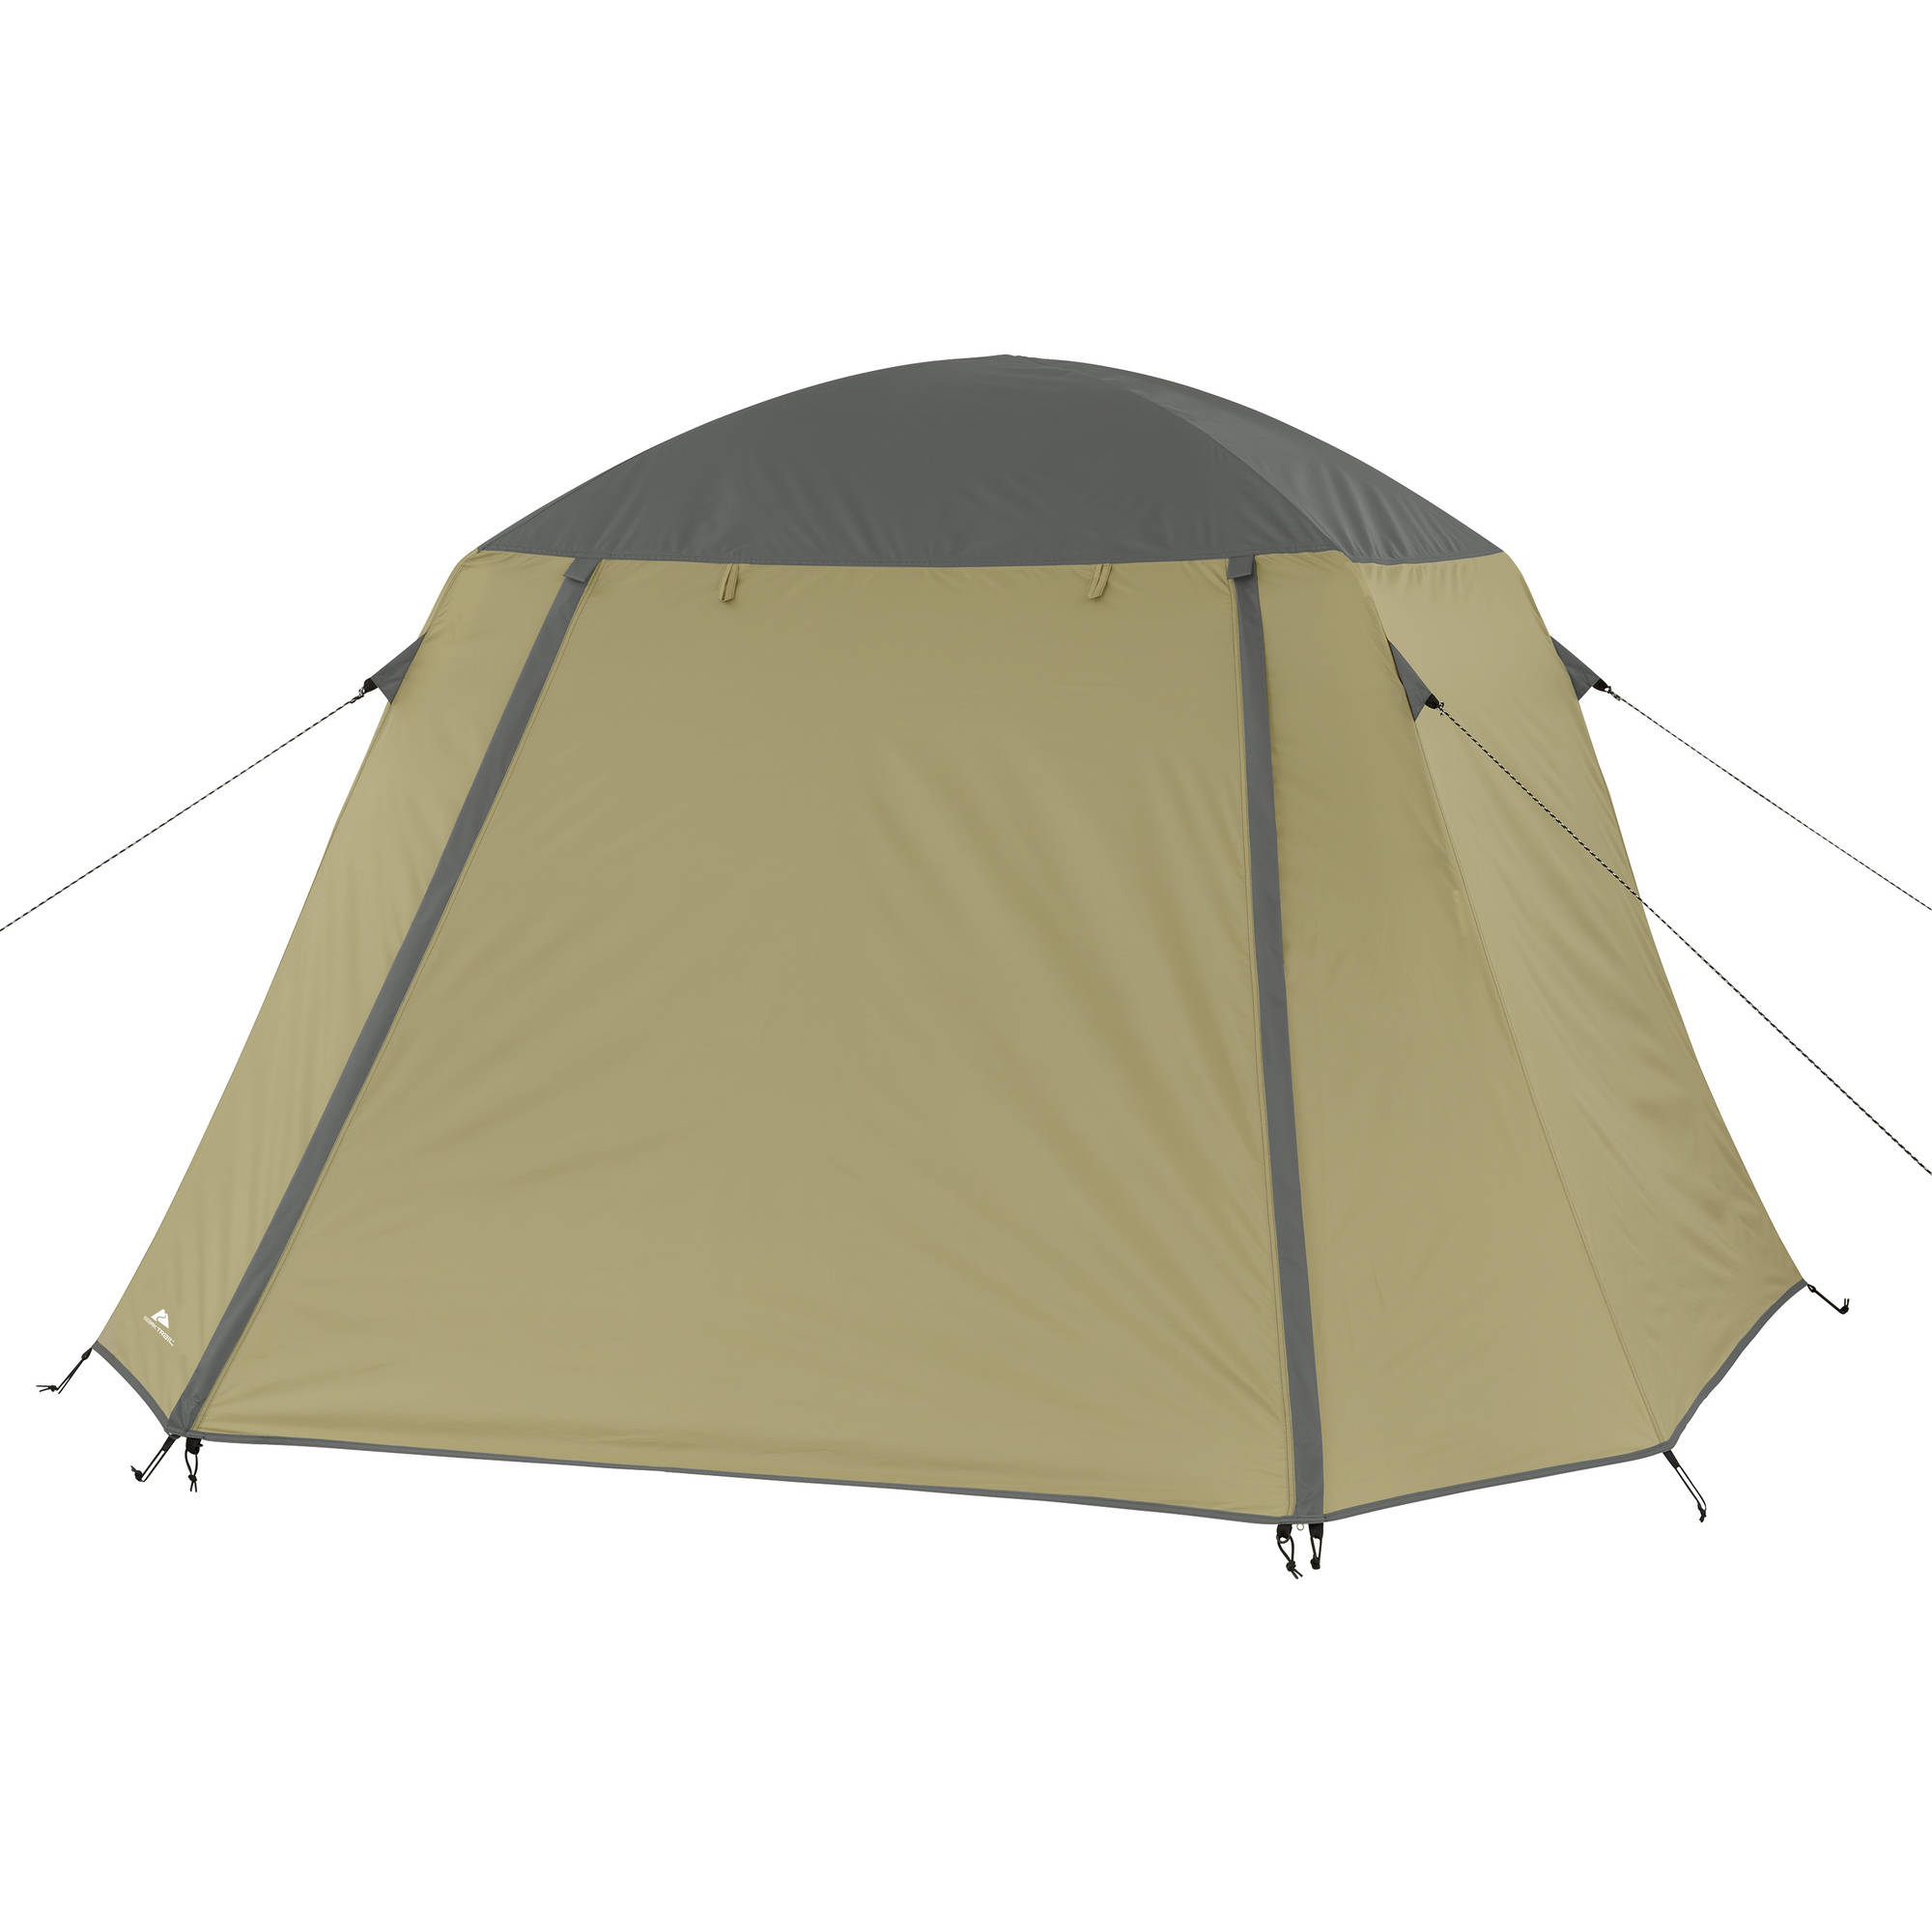 Ozark Trail Two-Person Cot Tent - image 1 of 7